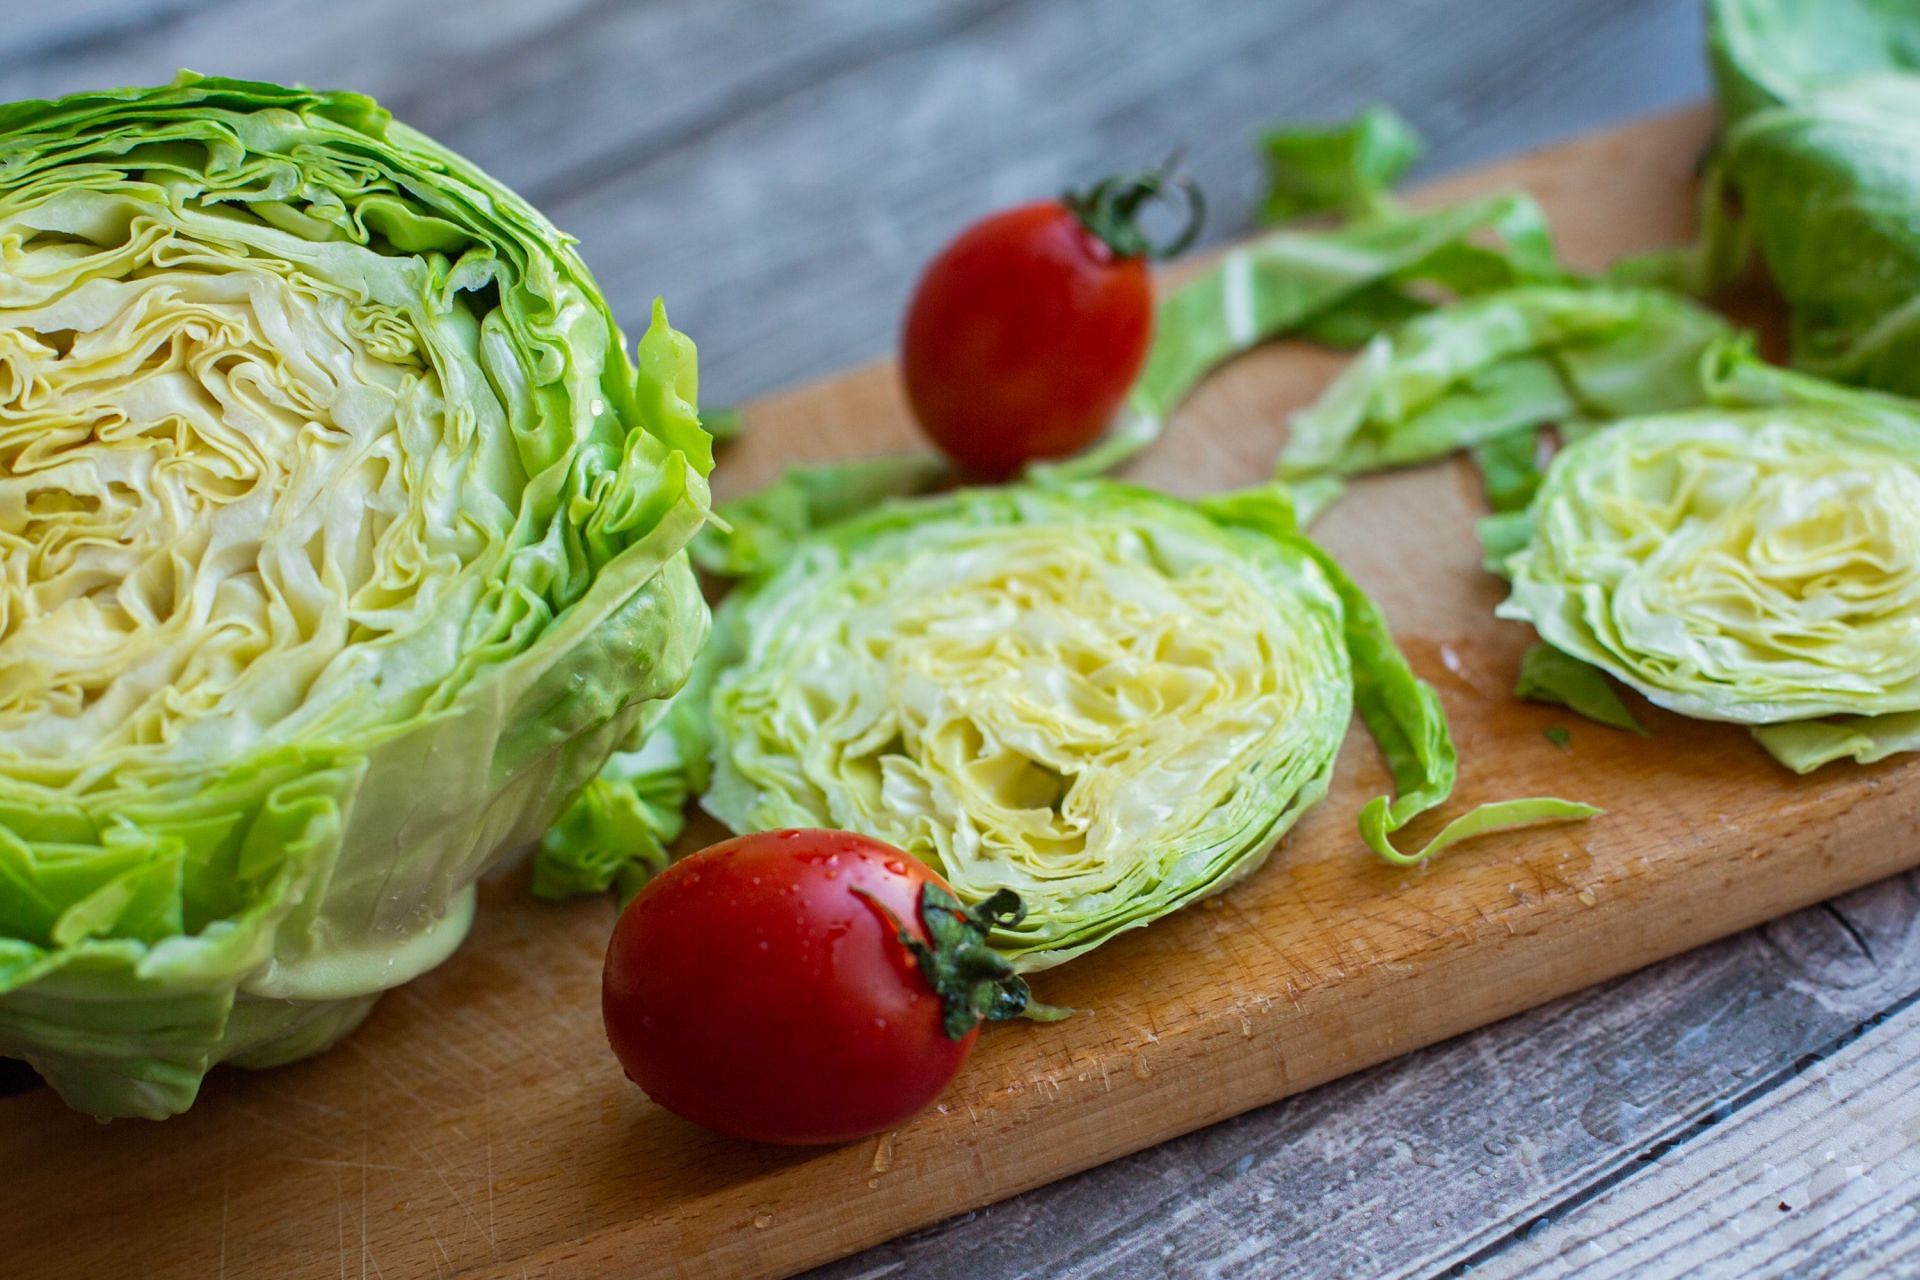 Iceberg lettuce, also known as crisphead lettuce, is a popular variety of lettuce that is widely consumed worldwide (Photo by Victoria Emerson/pexels)